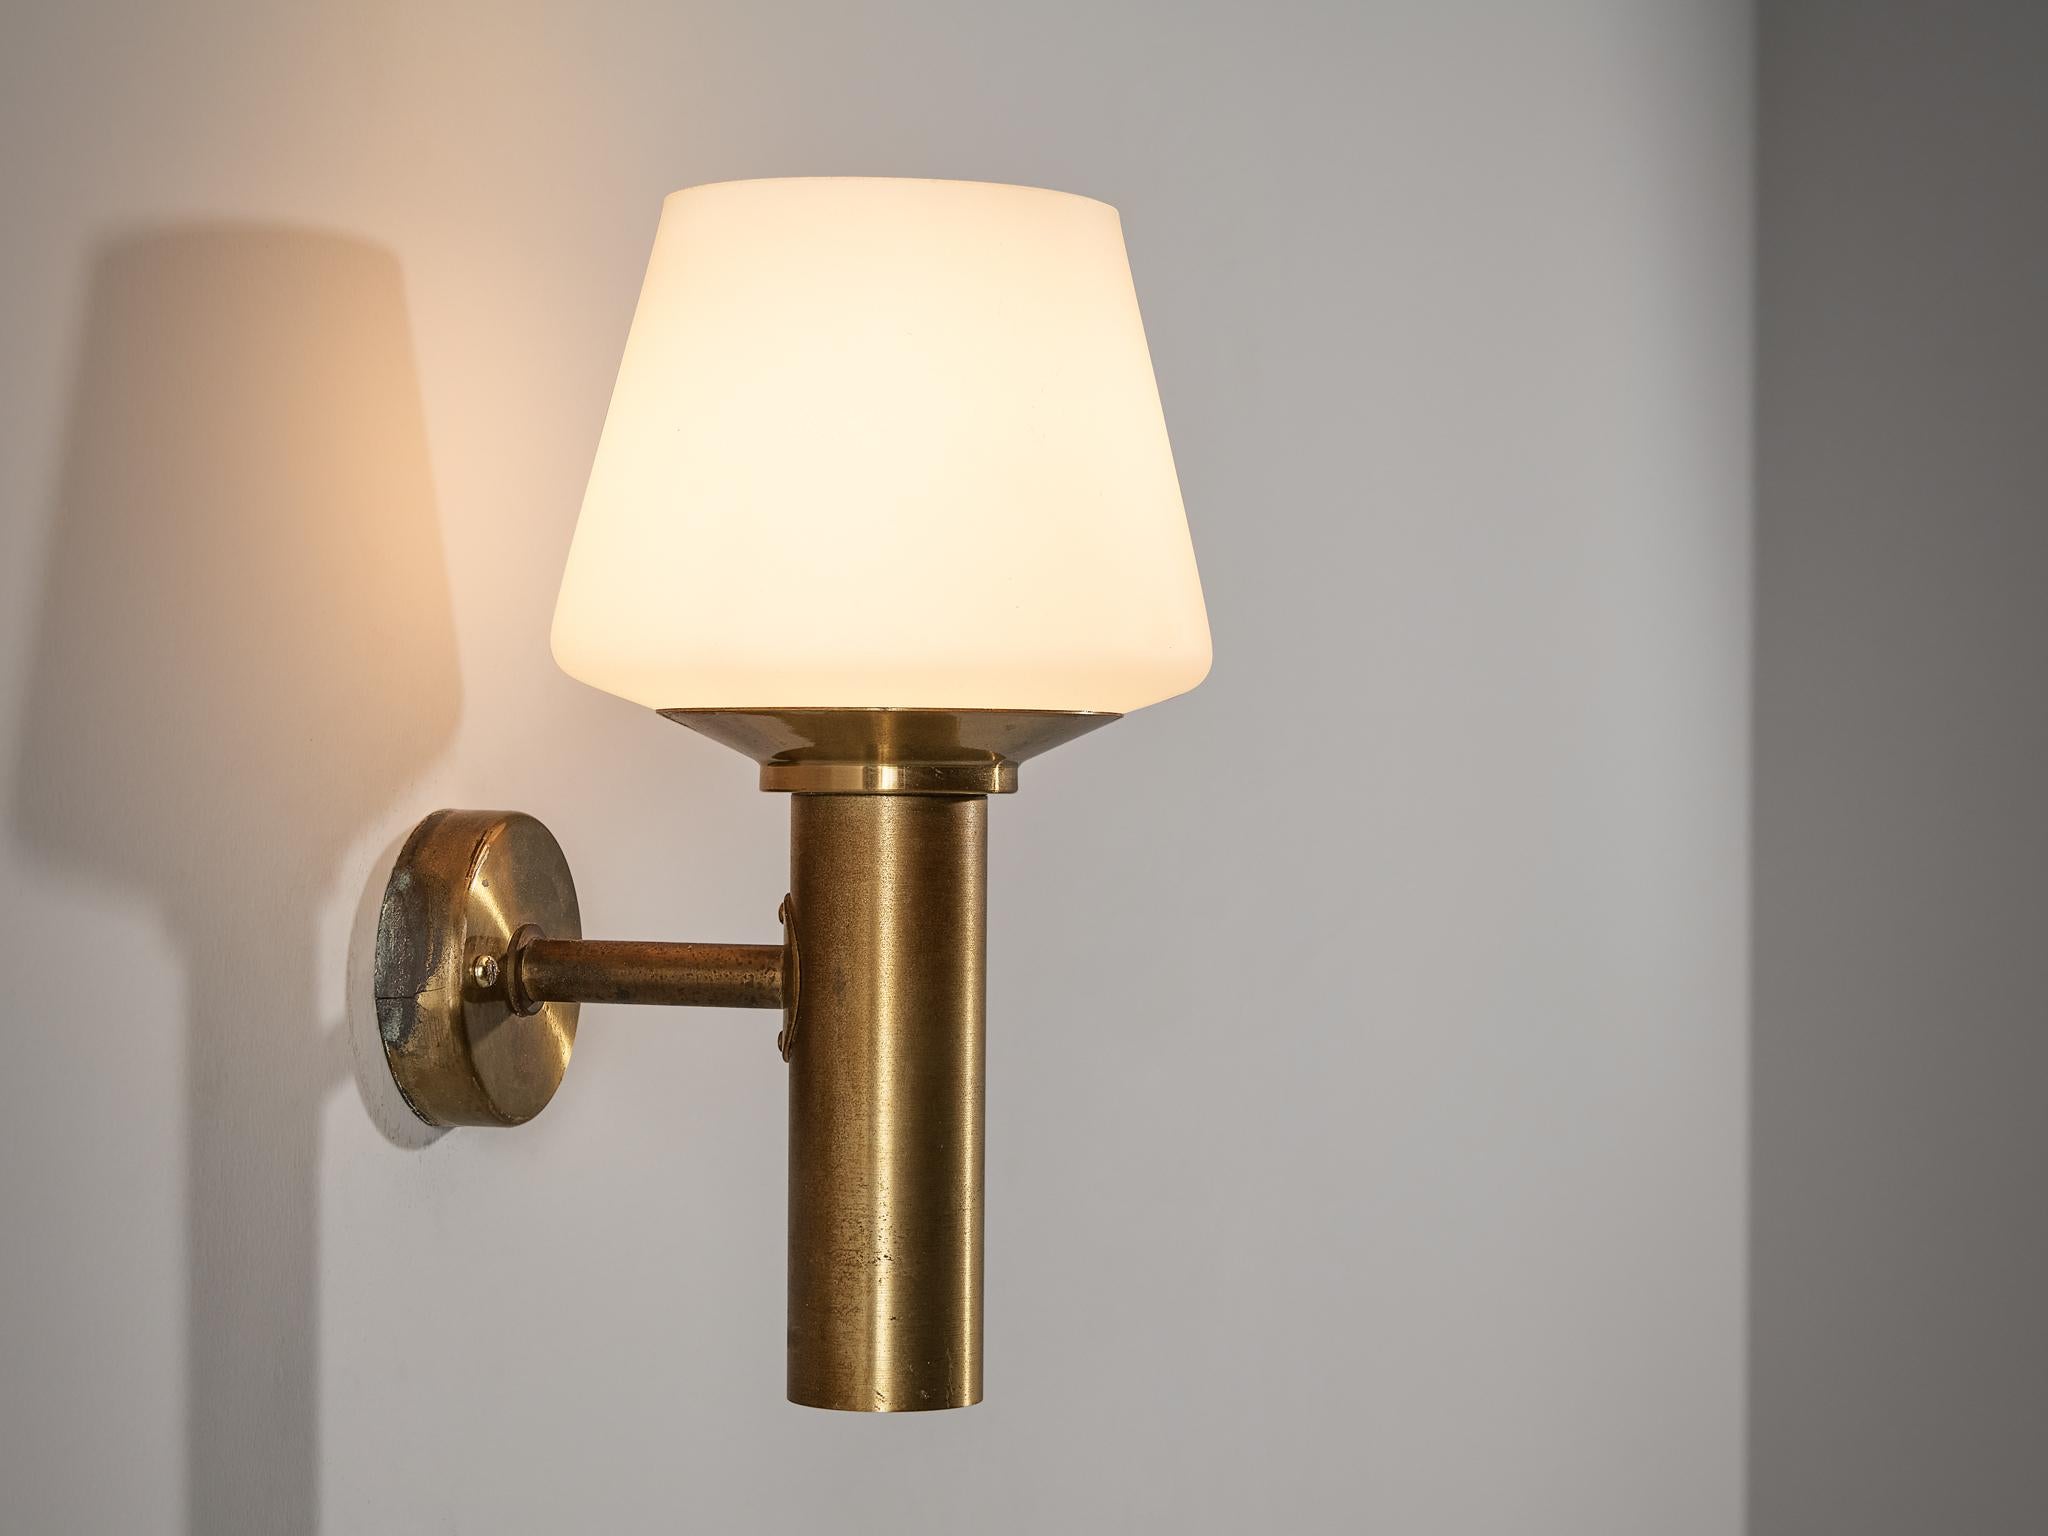 Hans-Agne Jakobsson for Hans-Agne Jakobsson AB in Markaryd, wall light, brass, opaline glass, Sweden, 1960s 

This elegant wall light is designed by Hans-Agne Jakobsson around the 60s. The opaline glass sphere, displaying a natural and soft glow, is